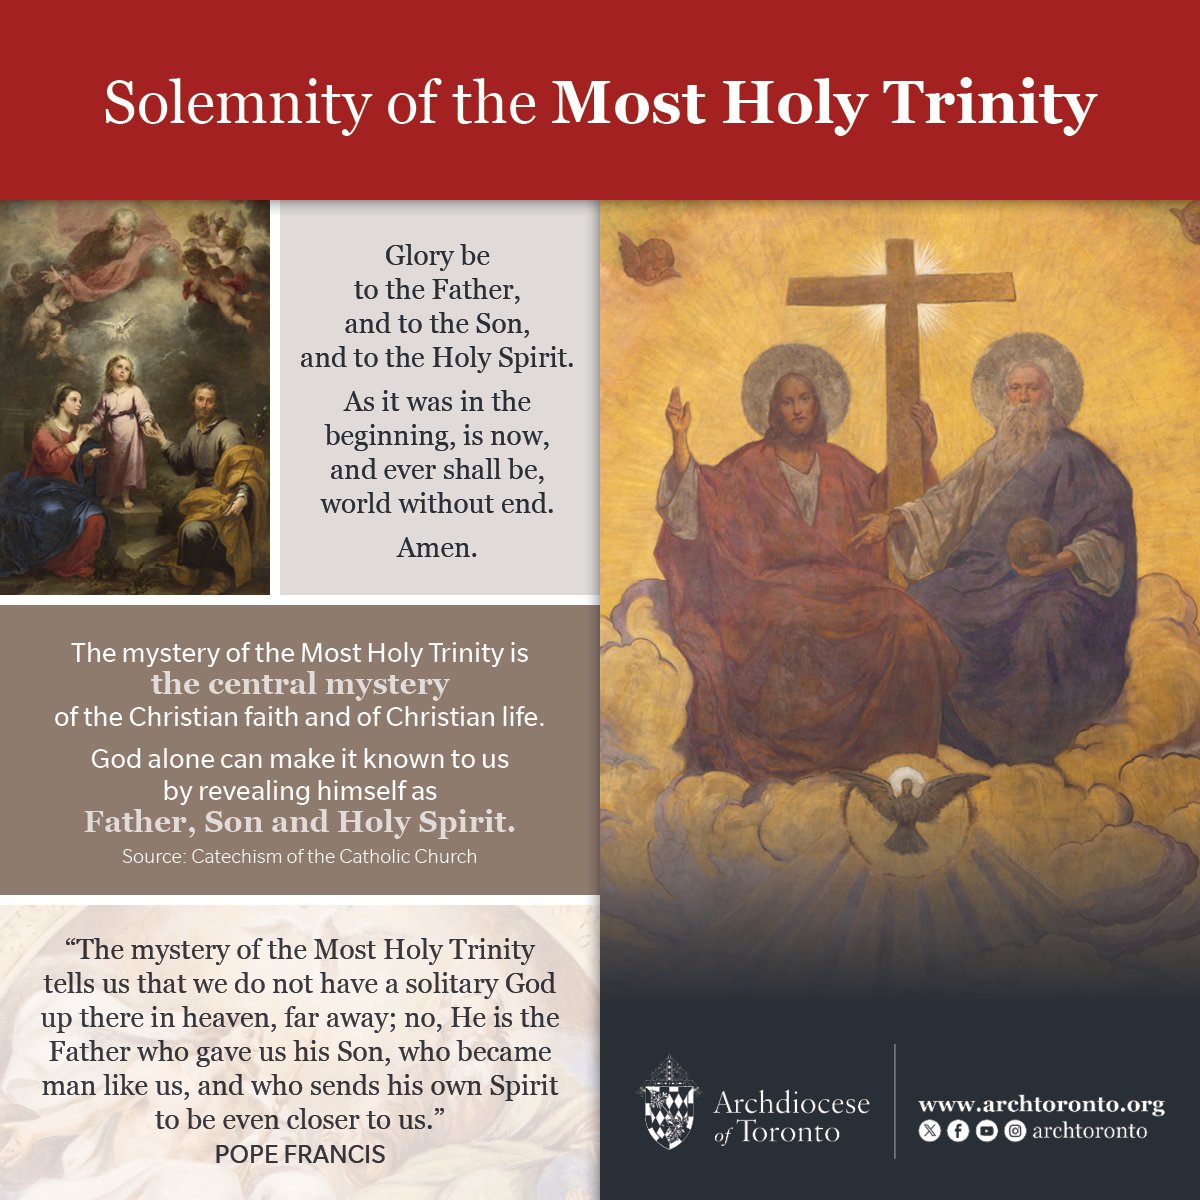 'The mystery of the Most #HolyTrinity tells us that we do not have a solitary God up there in heaven, far away; no, He is the Father who gave us his Son, who became man like us, and who sends his own Spirit to be even closer to us.' Pope Francis